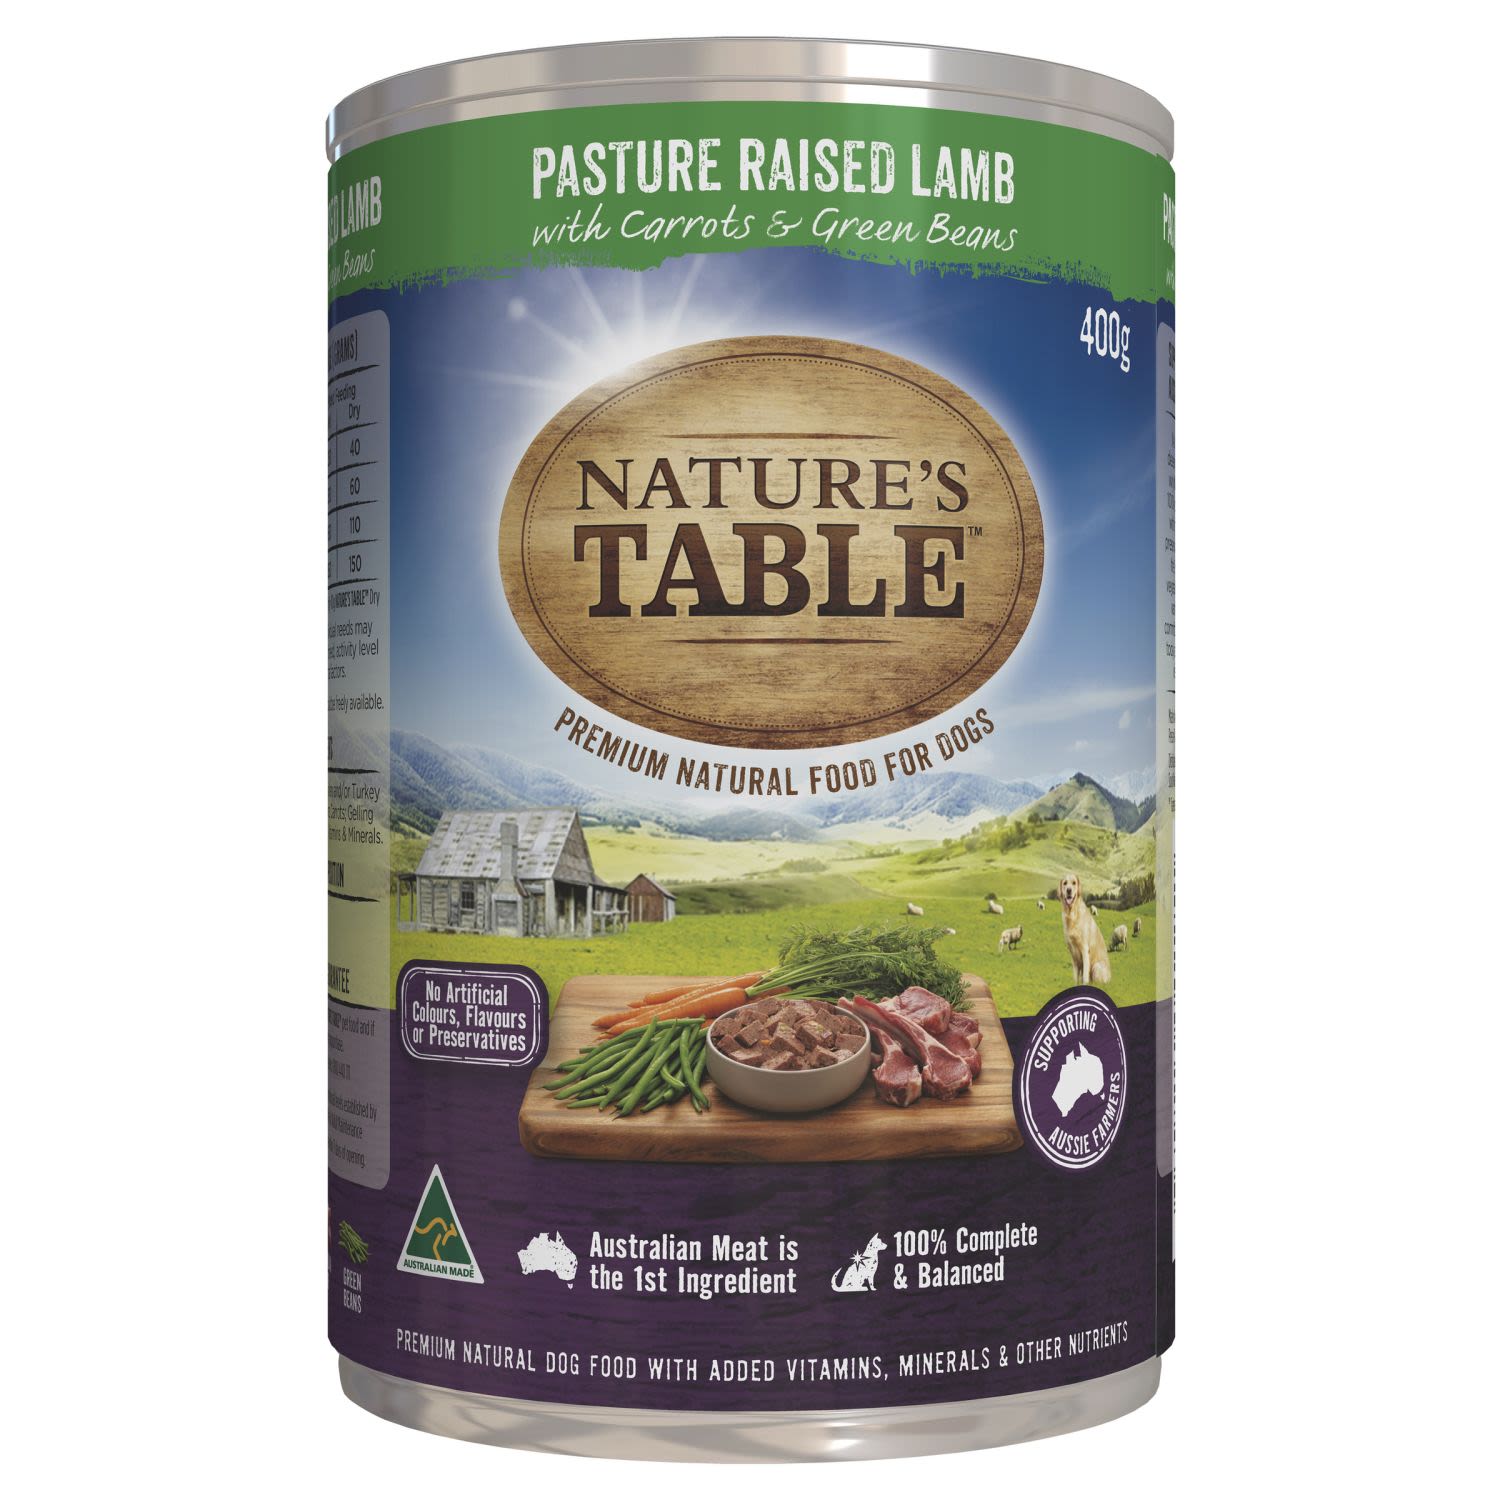 Nature's Table Pasture Raised Lamb with Carrots & Green Beans Wet Dog Food Can, 400 Gram